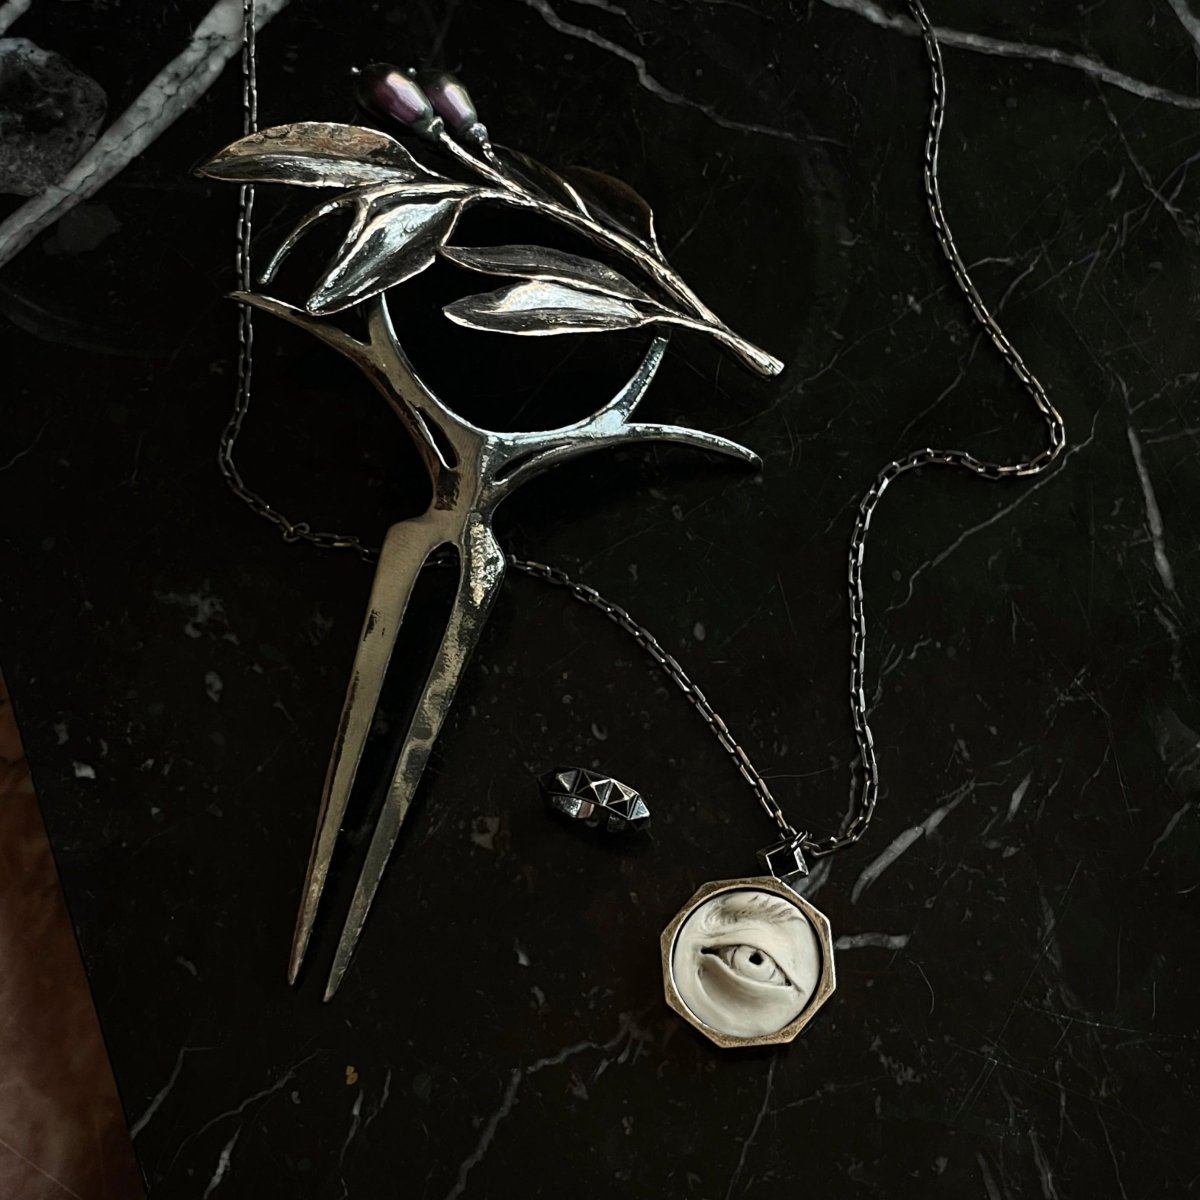 OLIVE BRANCH HAIRPIN - Macabre Gadgets Store